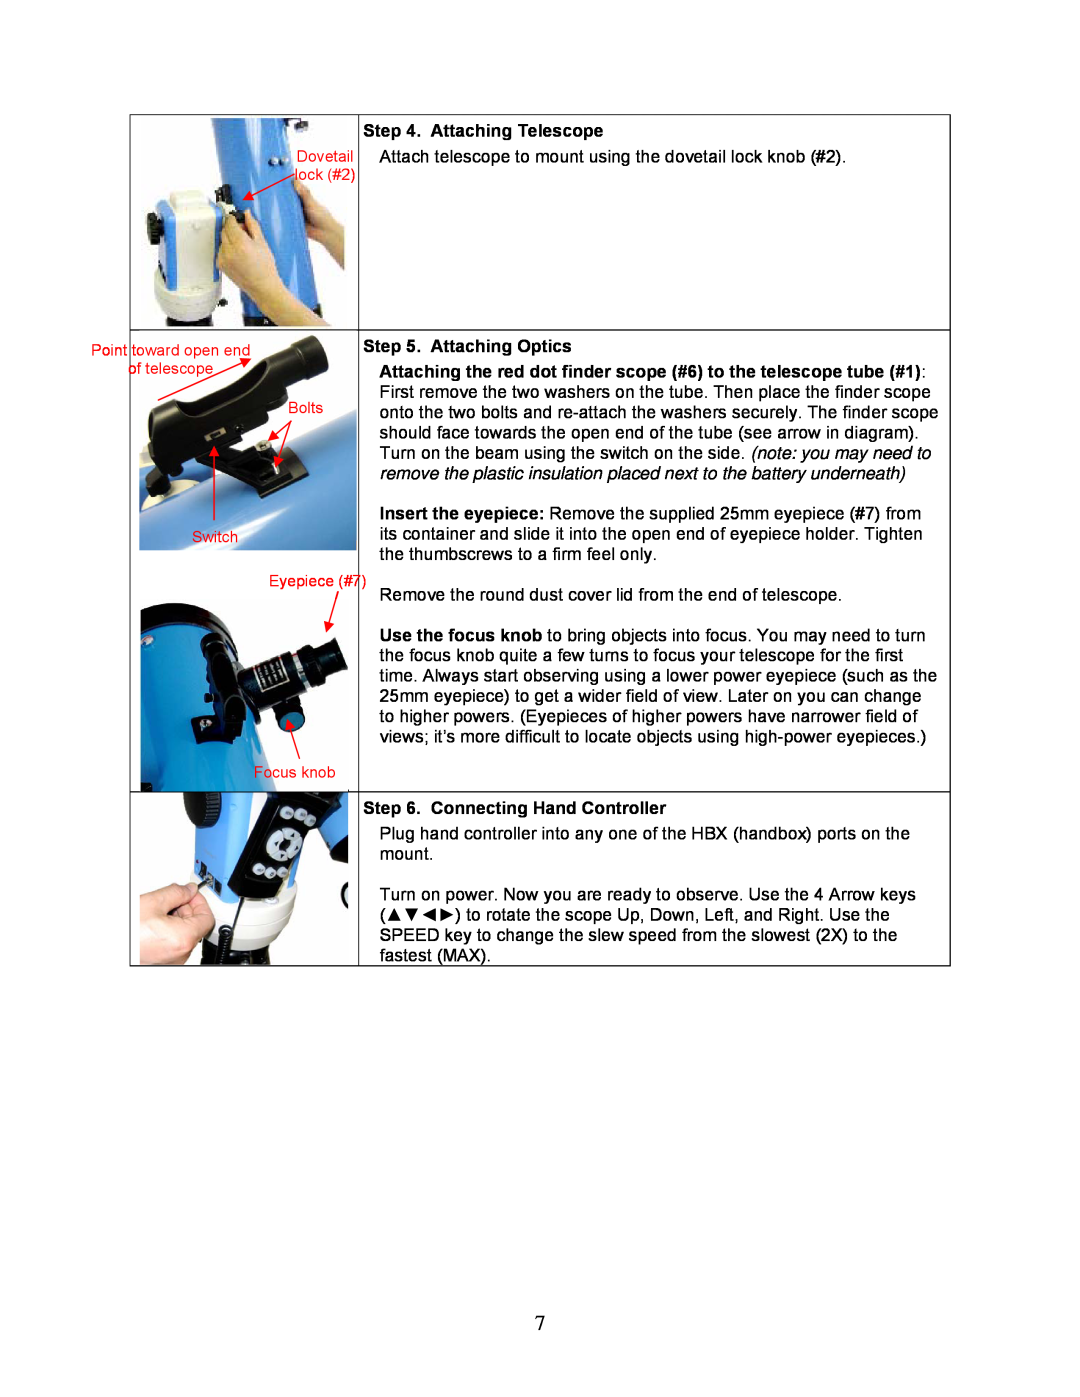 iOptron N114 instruction manual Attaching Telescope, Attaching Optics, Connecting Hand Controller 